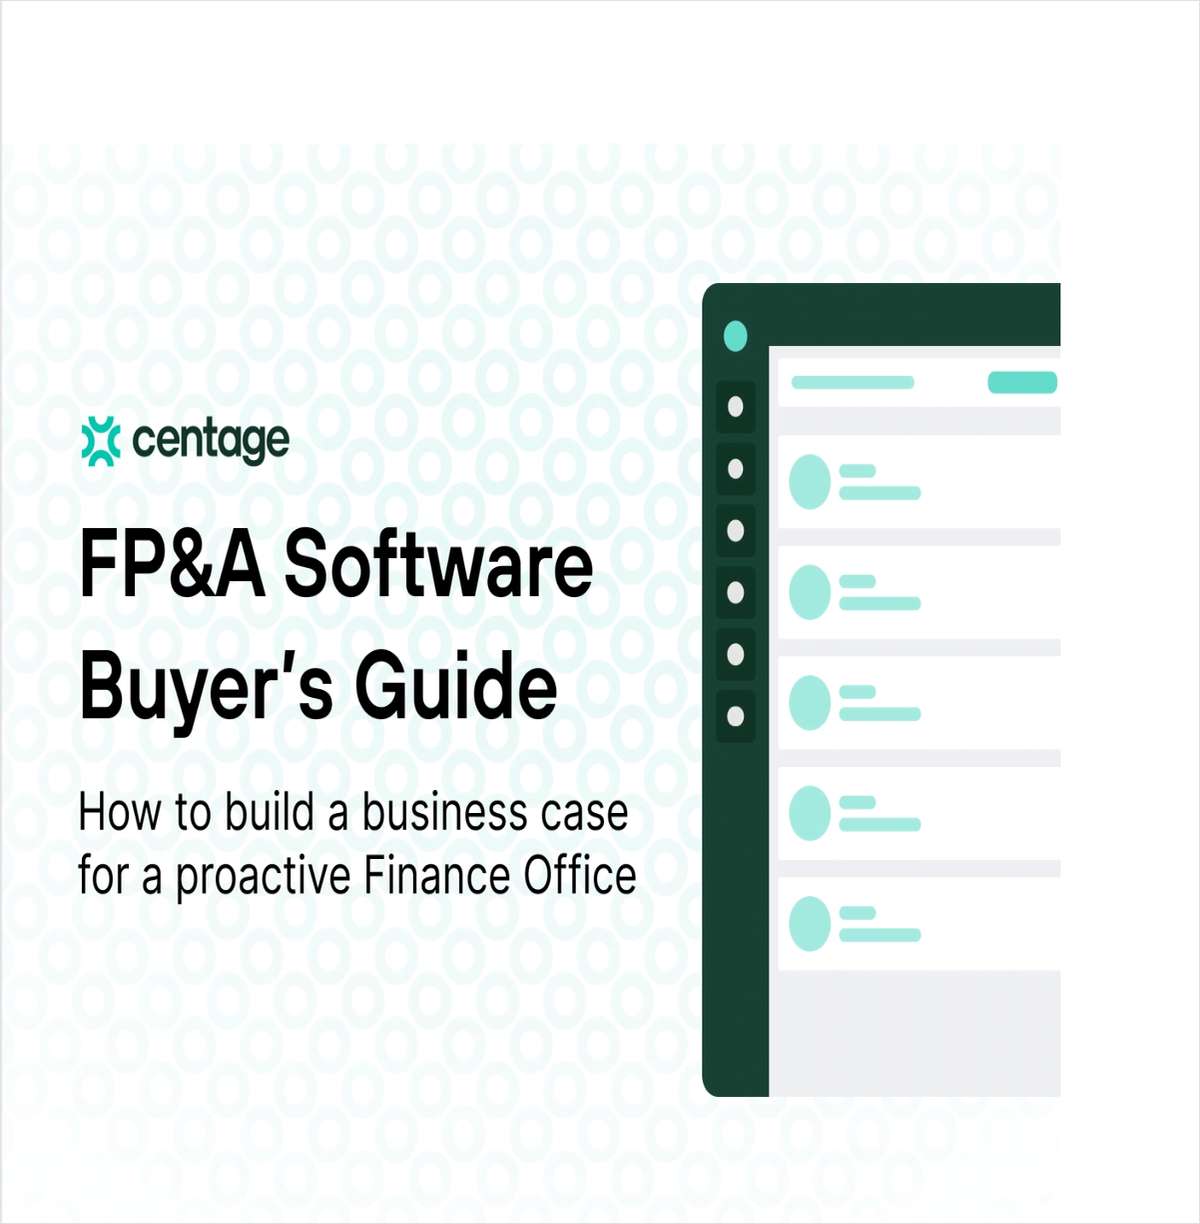 FP&A Software Buyerʼs Guide